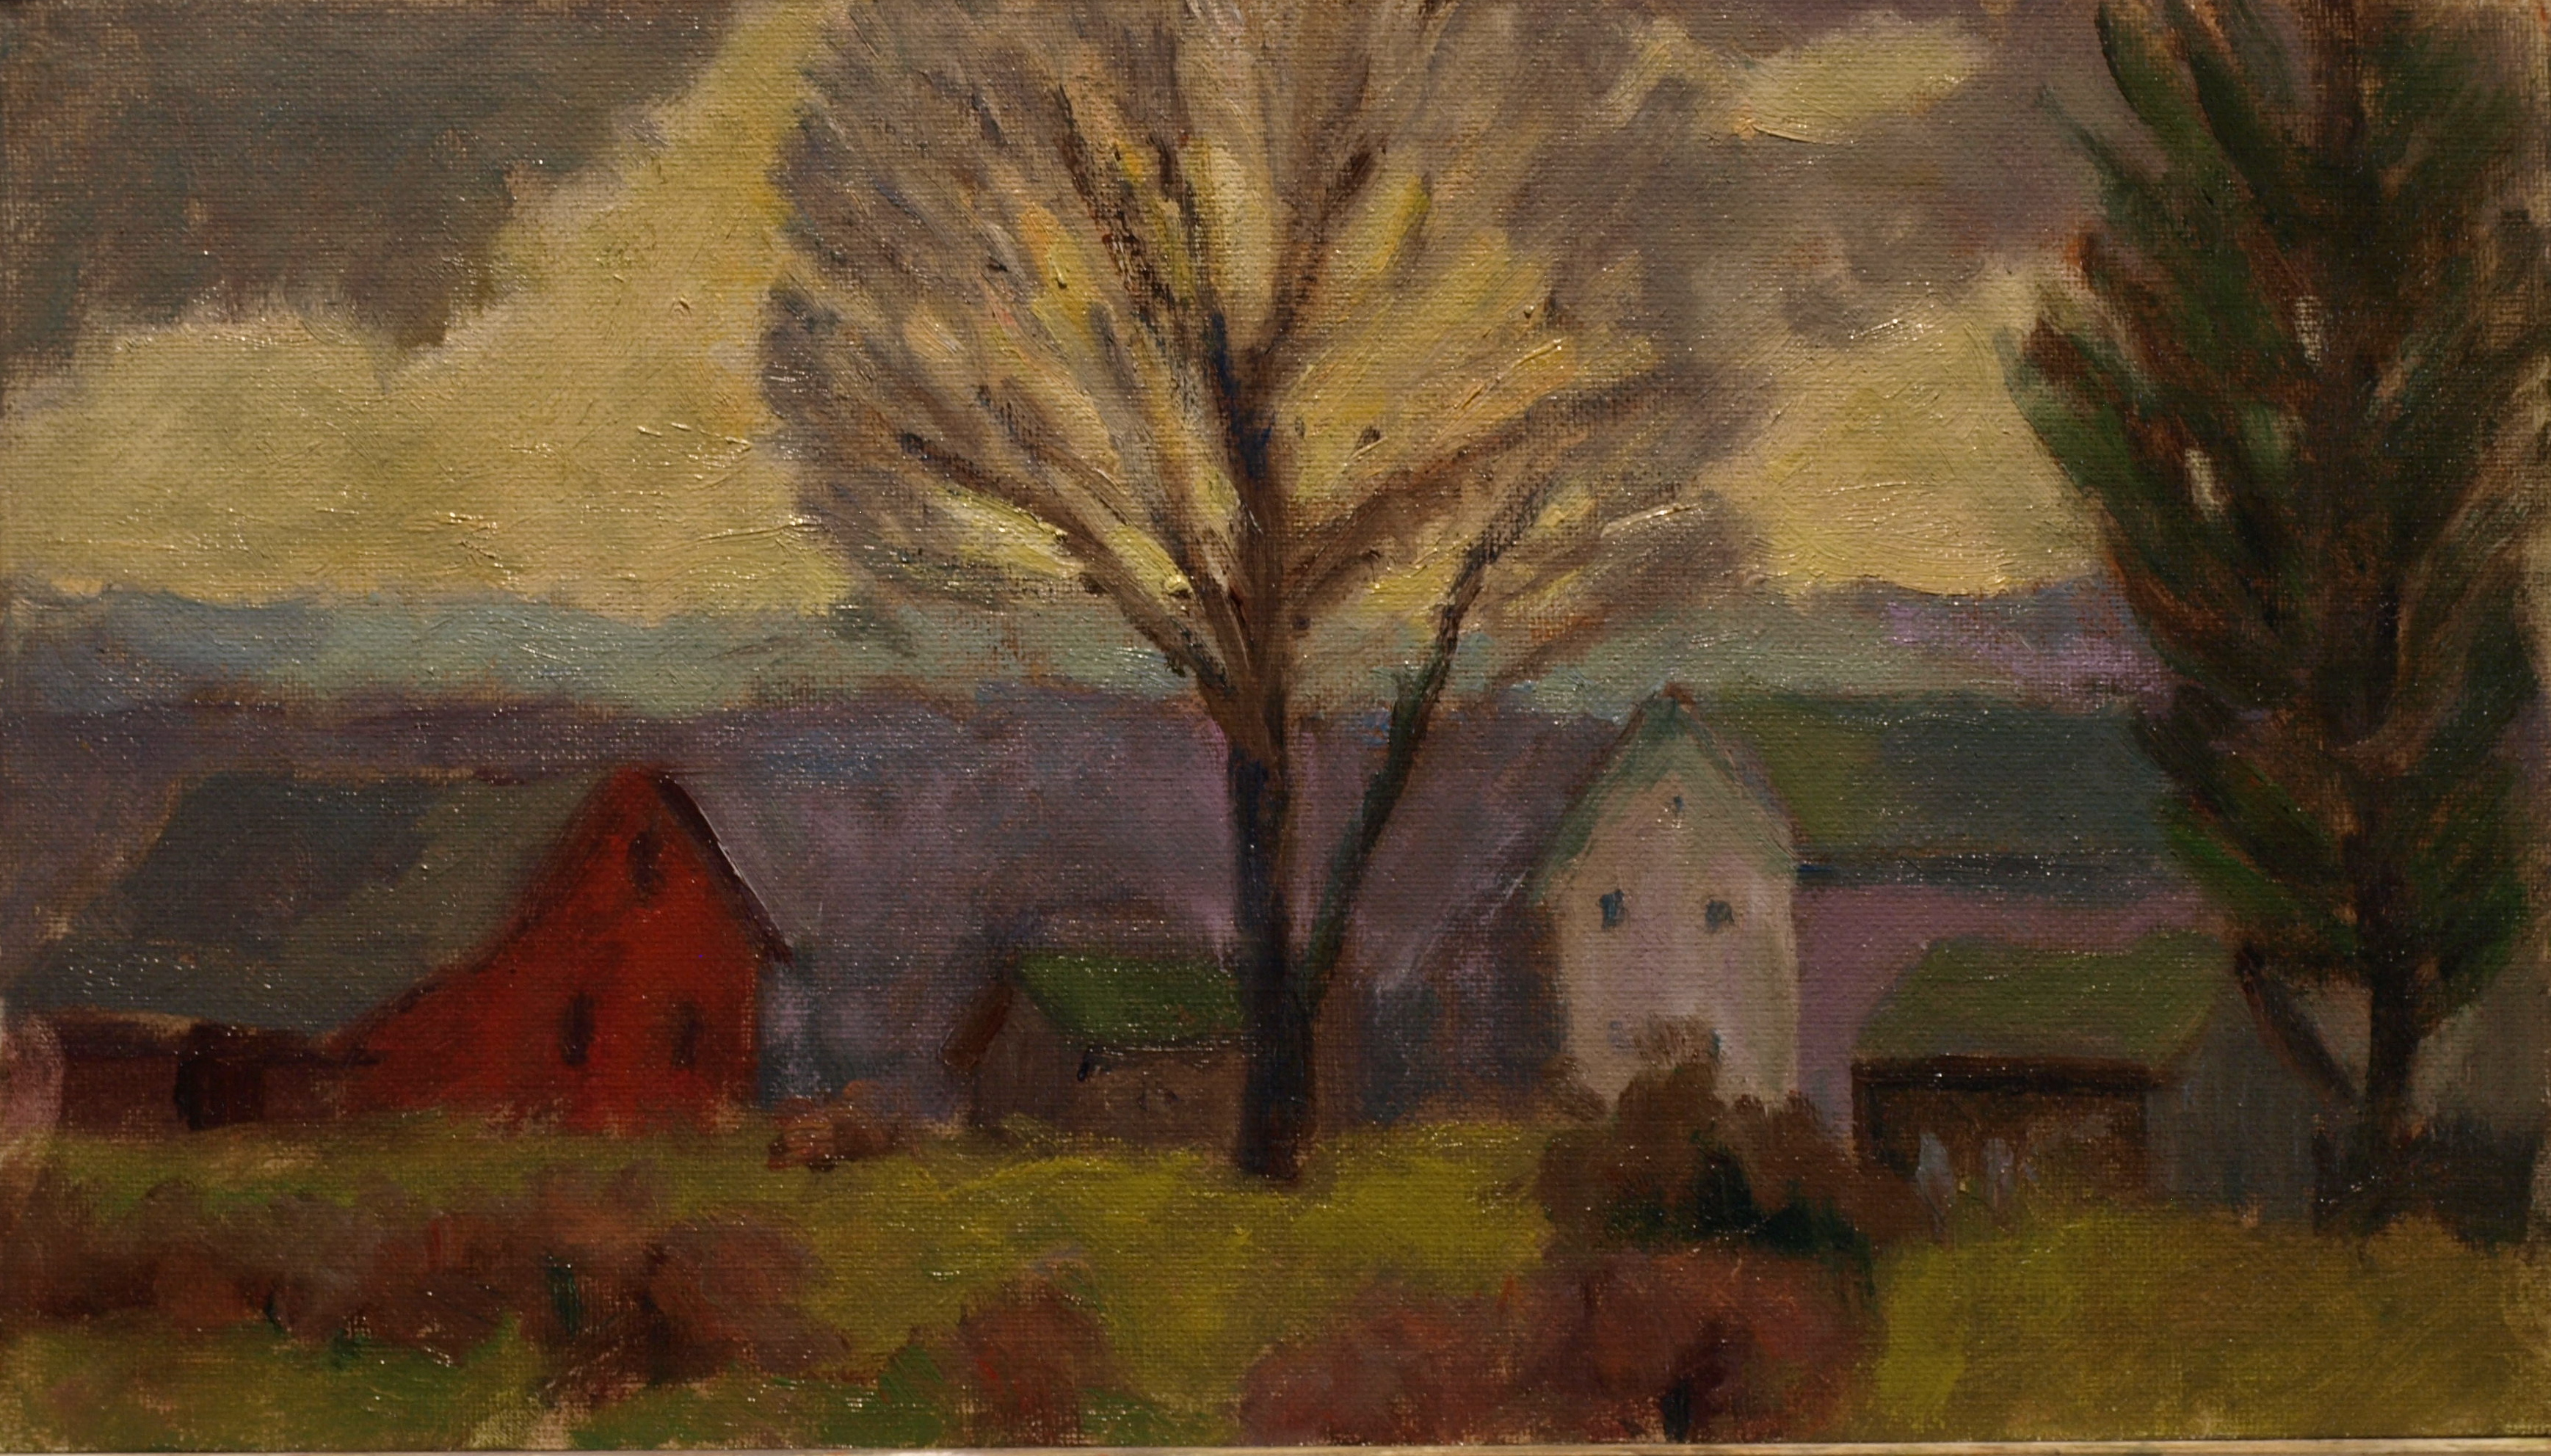 Autumn Evening, Oil on Canvas on Panel, 8 x 14 Inches, by Richard Stalter, $220